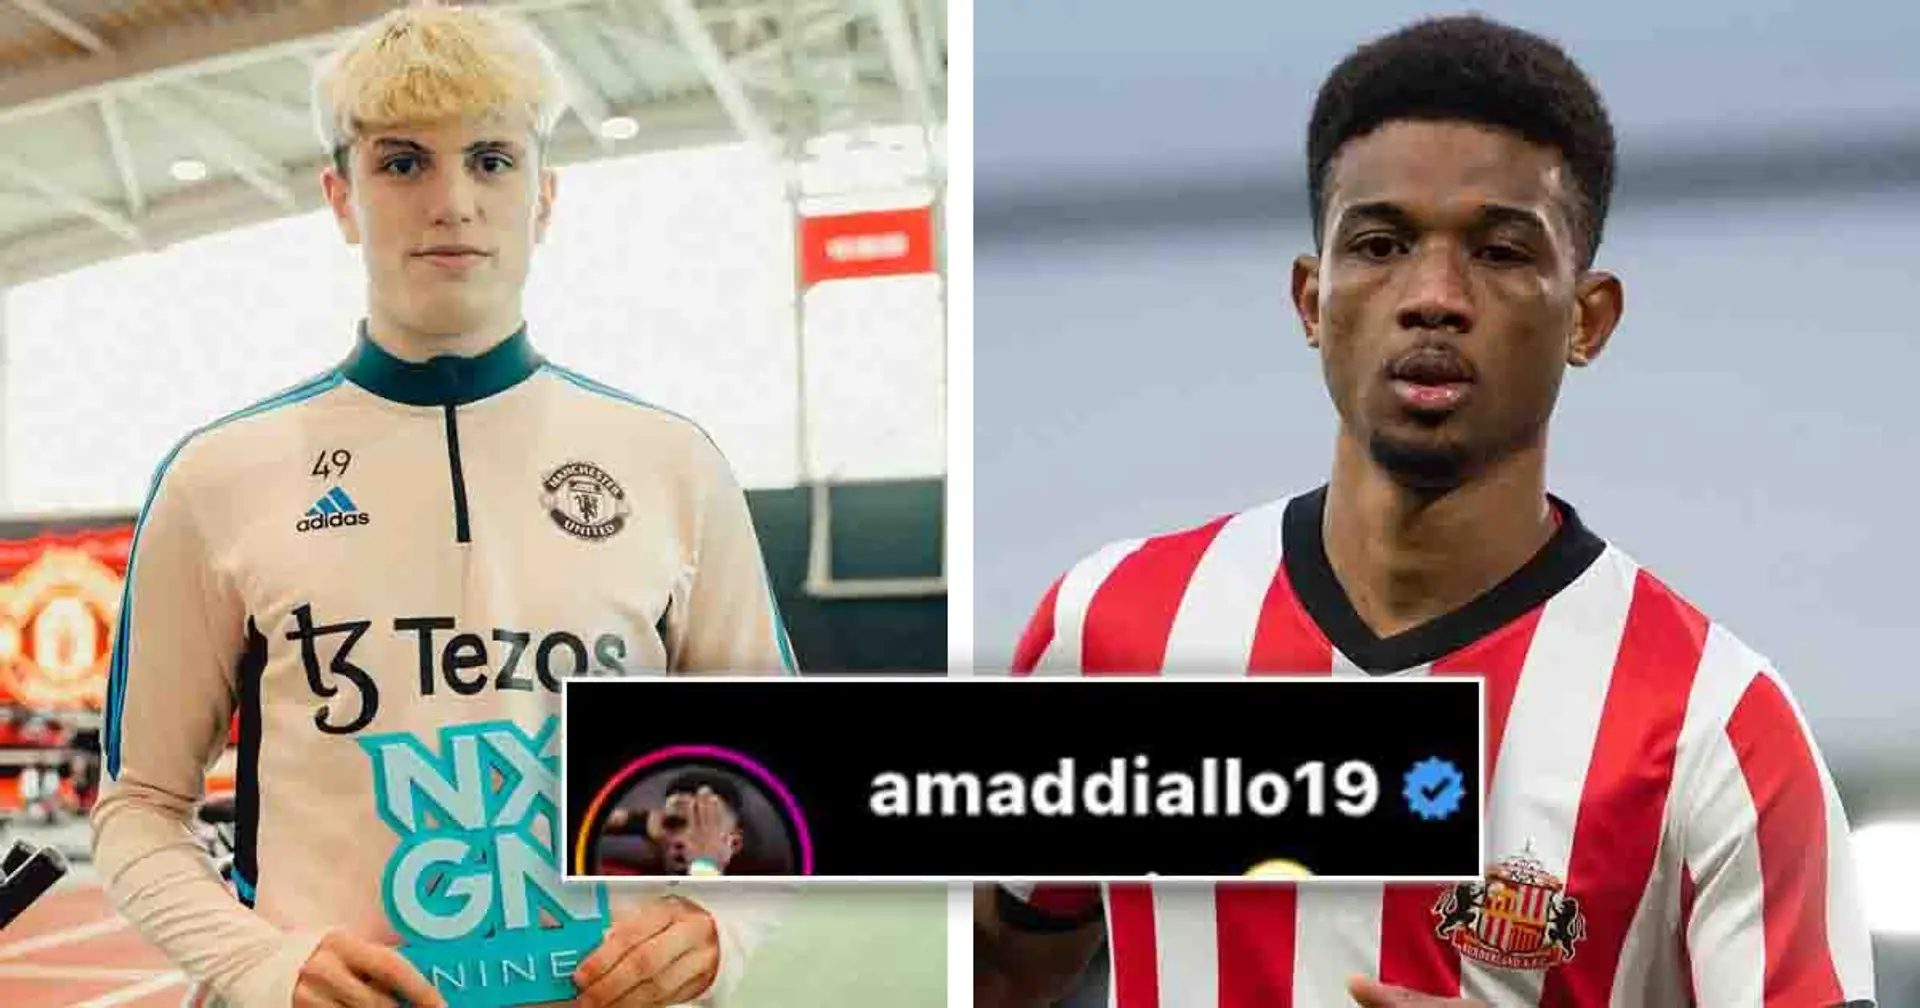 Amad Diallo shares sweet bromance with Garnacho in Instagram giveaway event